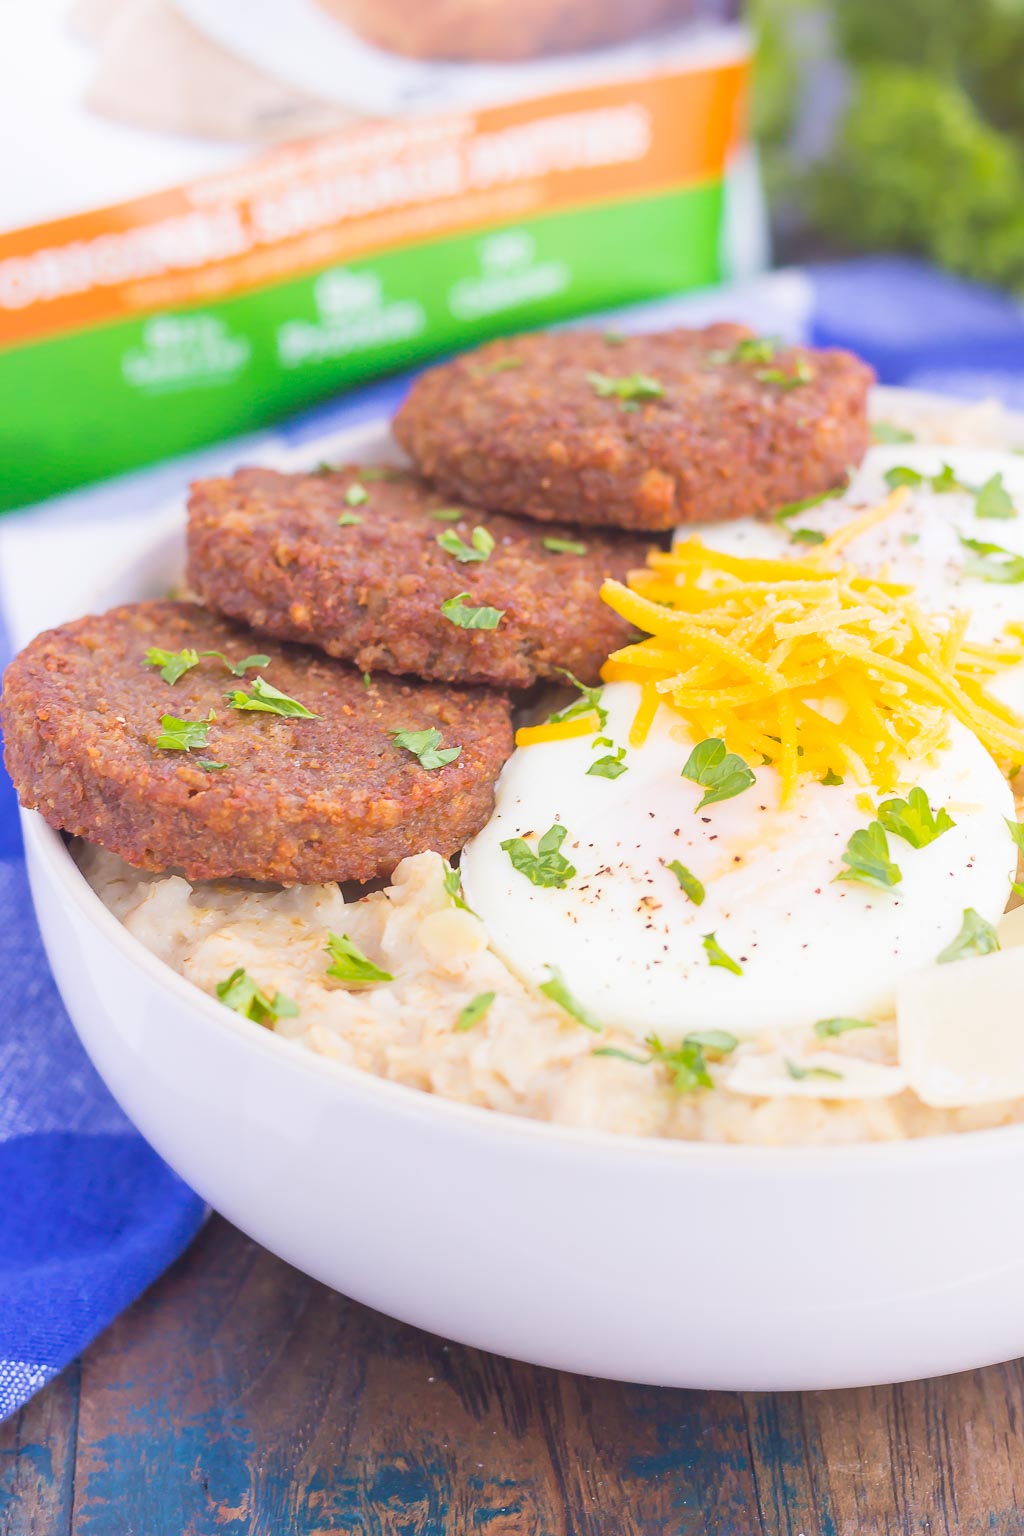 Savory Parmesan Oatmeal is a delicious way to switch up your breakfast routine. Packed with hearty oats, fresh Parmesan cheese and veggie sausage, this simple dish is a great option for when you want a warm and comforting meal!